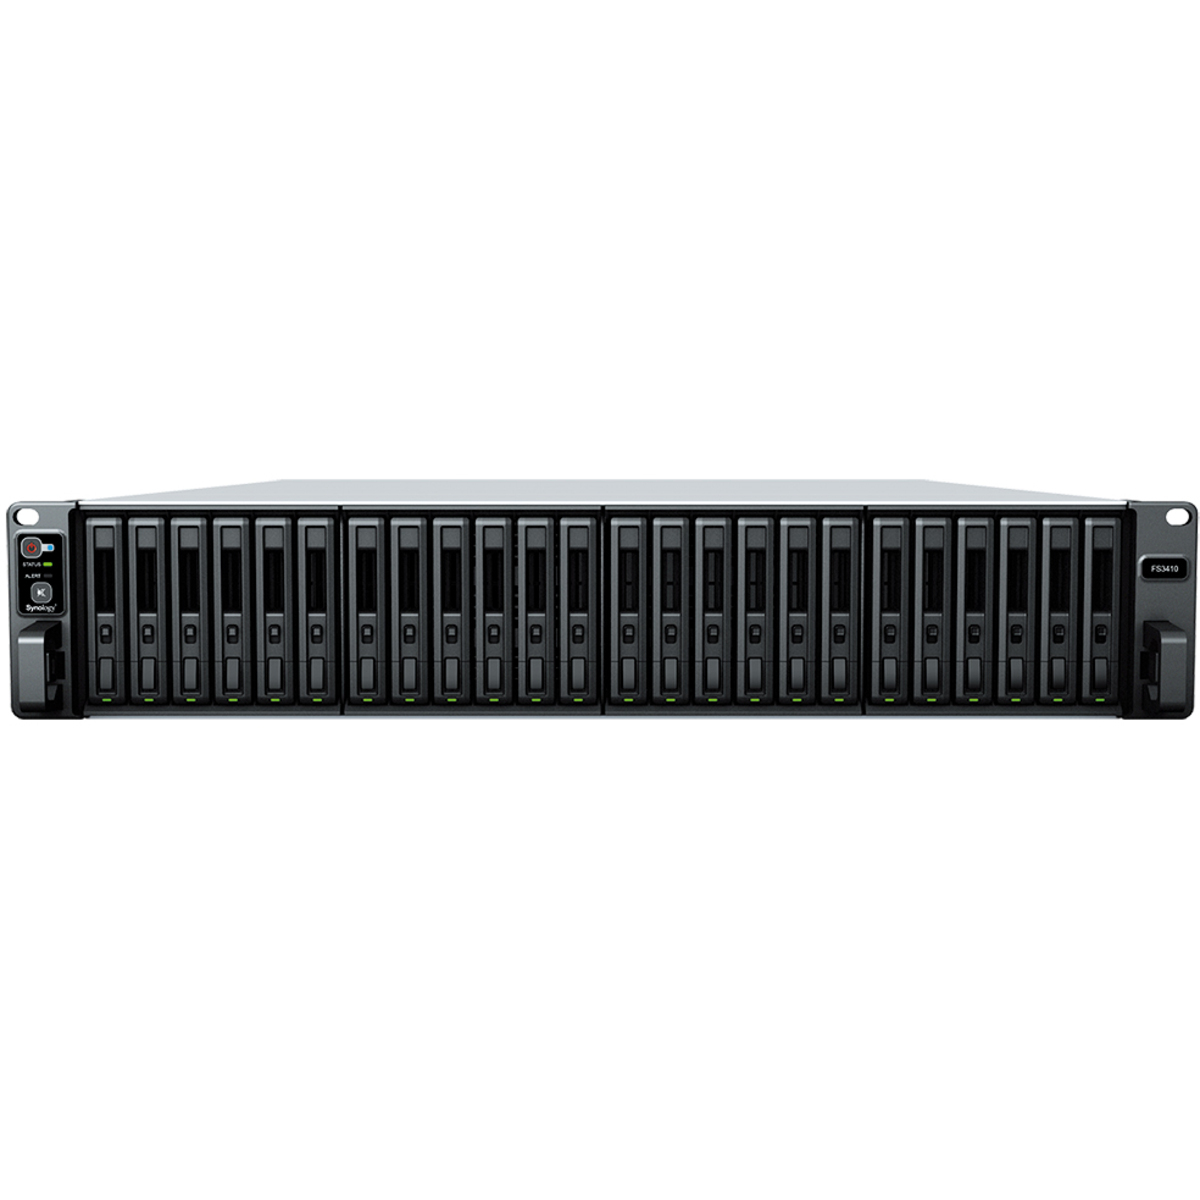 Synology FlashStation FS3410 44tb 24-Bay RackMount Large Business / Enterprise NAS - Network Attached Storage Device 22x2tb Crucial MX500 CT2000MX500SSD1 2.5 560/510MB/s SATA 6Gb/s SSD CONSUMER Class Drives Installed - Burn-In Tested FlashStation FS3410